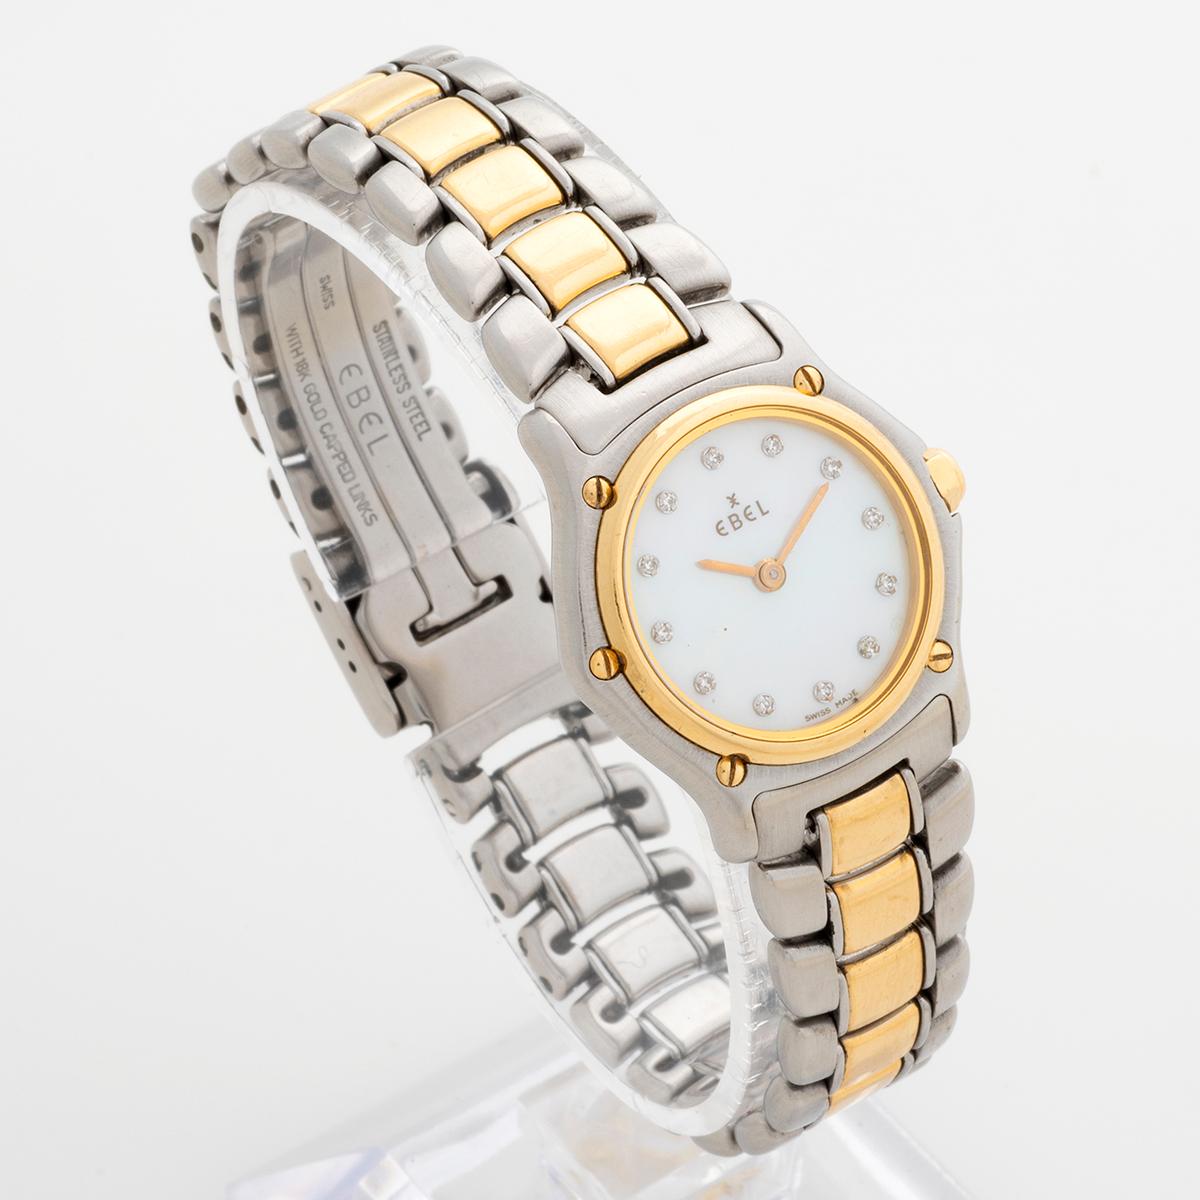 Our ladies Ebel mini sport features a 25mm stainless steel case with 18k yellow gold bezel, and a 1911 style sport bracelet in gold/steel. Of note is the very attractive mother of pearl dial with factory set diamond dot dial, with gold hands.